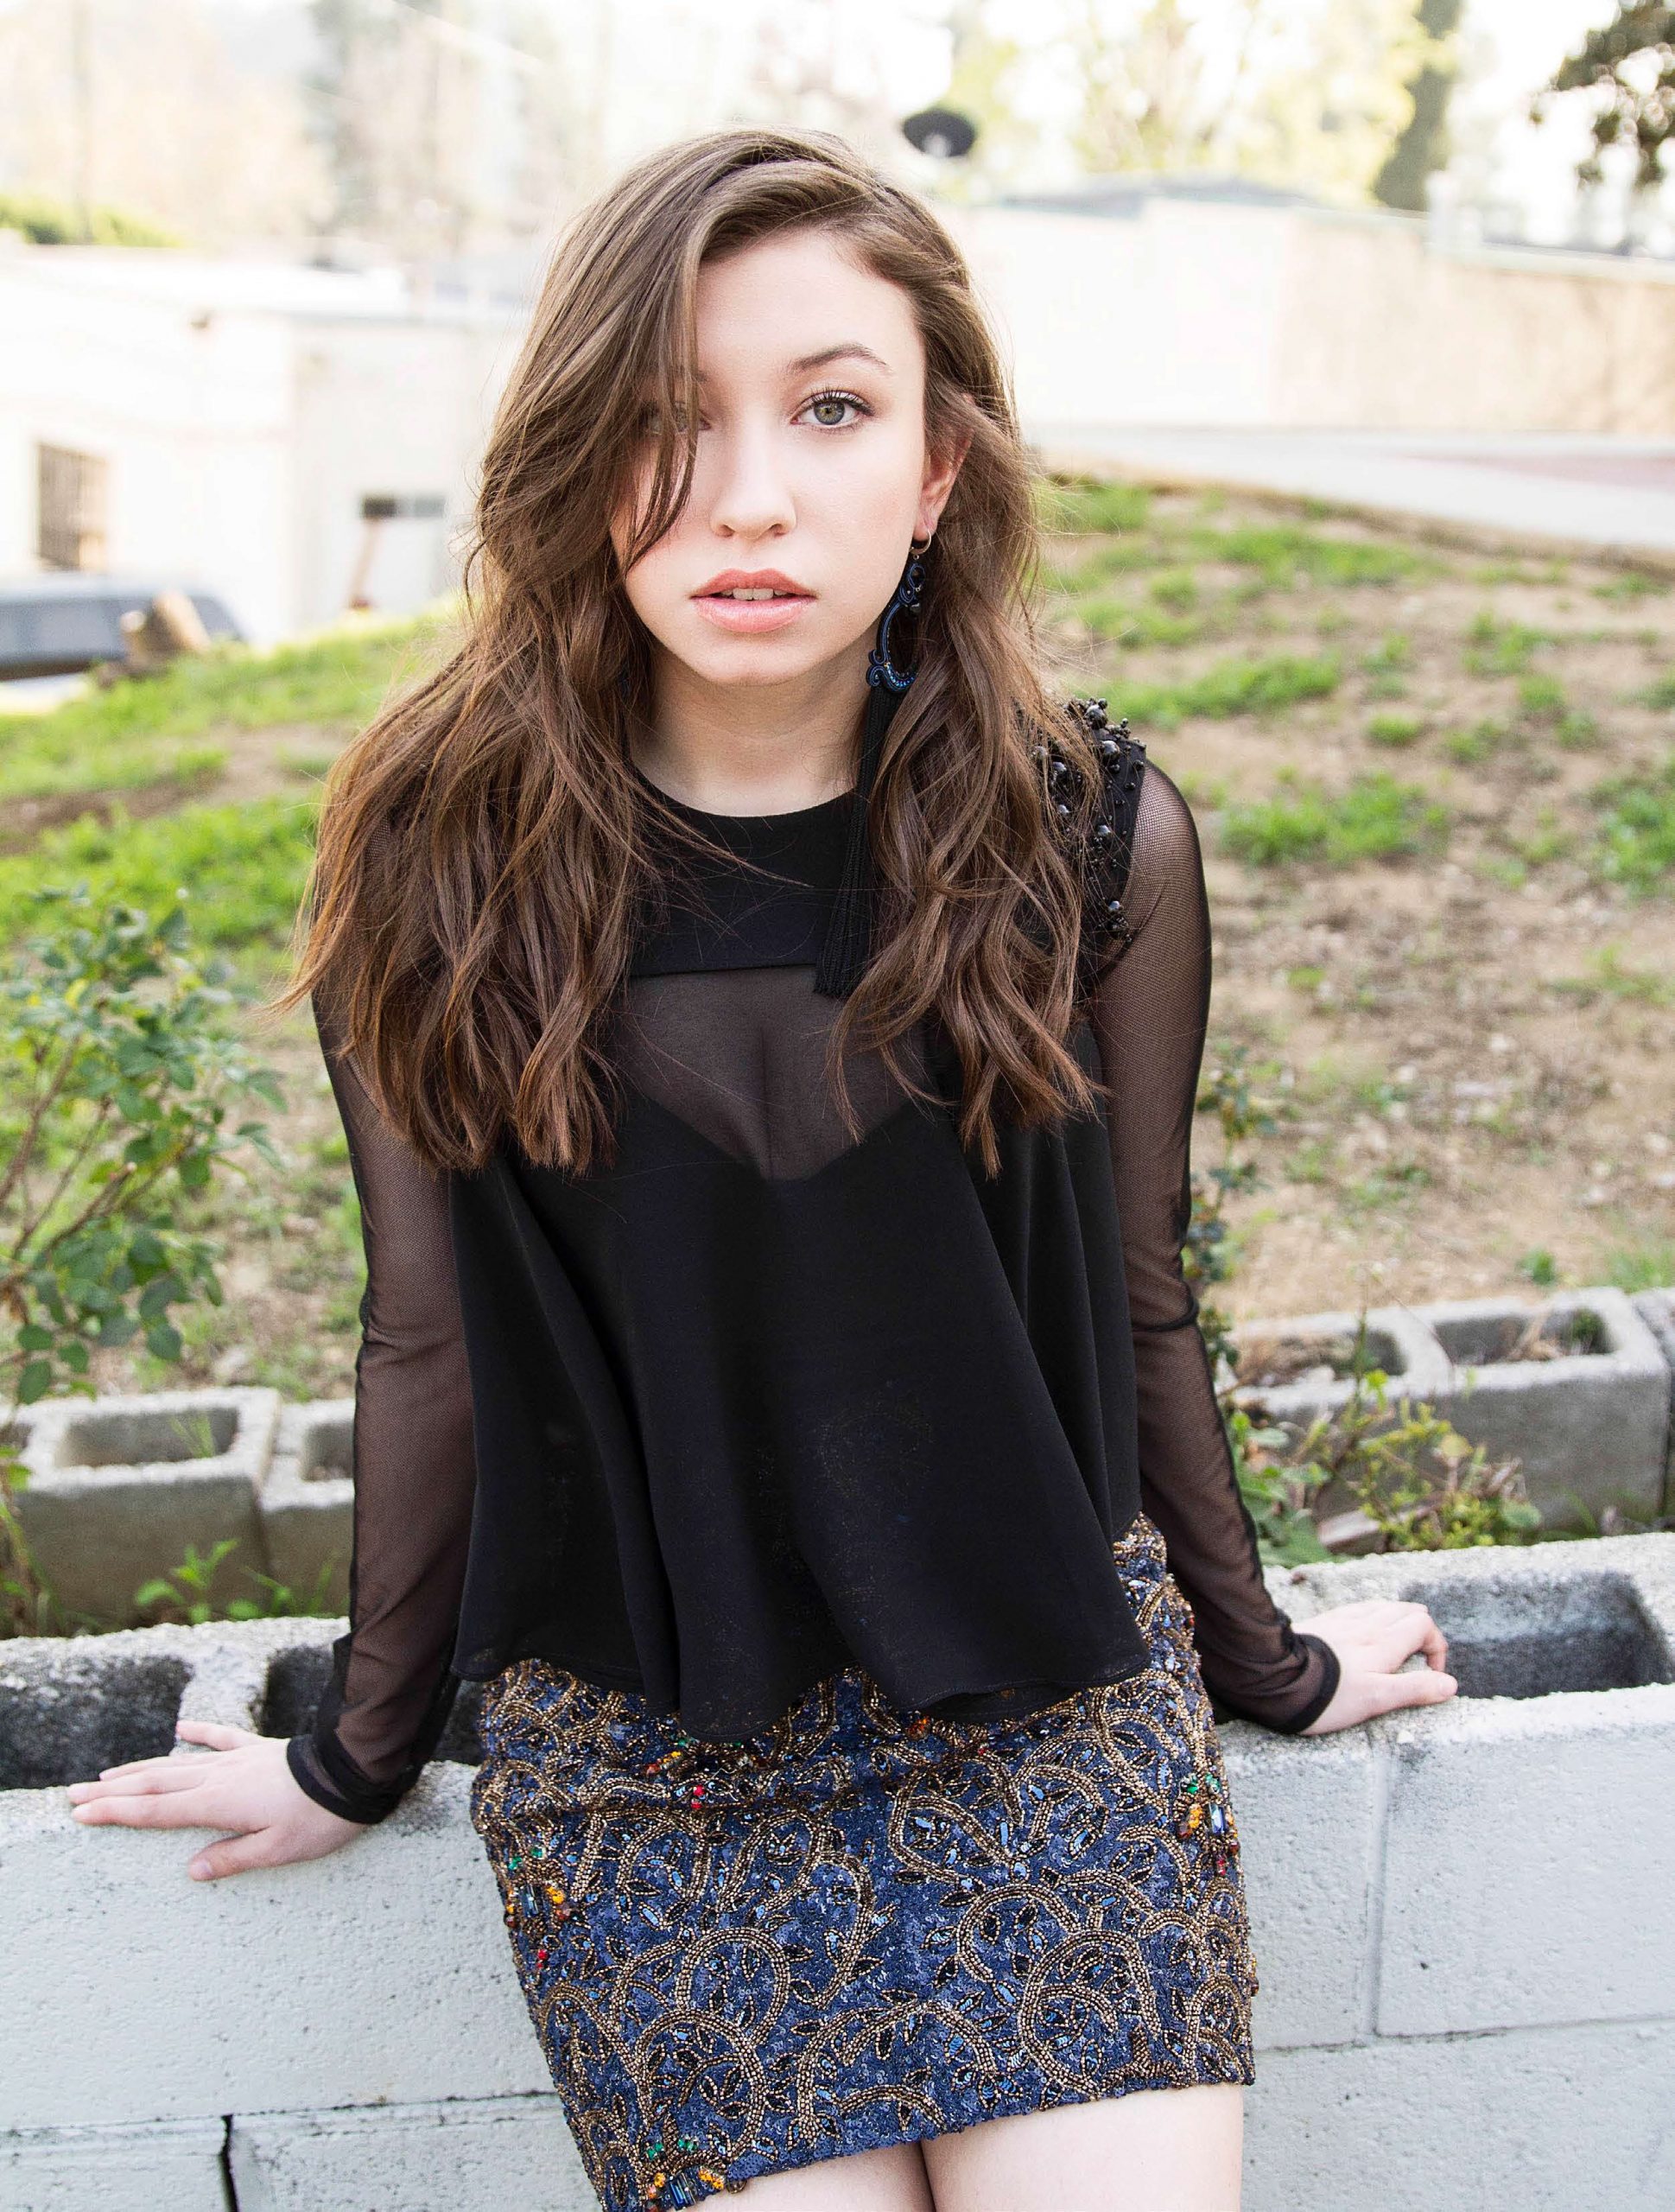 50 Katelyn Nacon Nude Pictures Which Prove Beauty Beyond Recognition 68